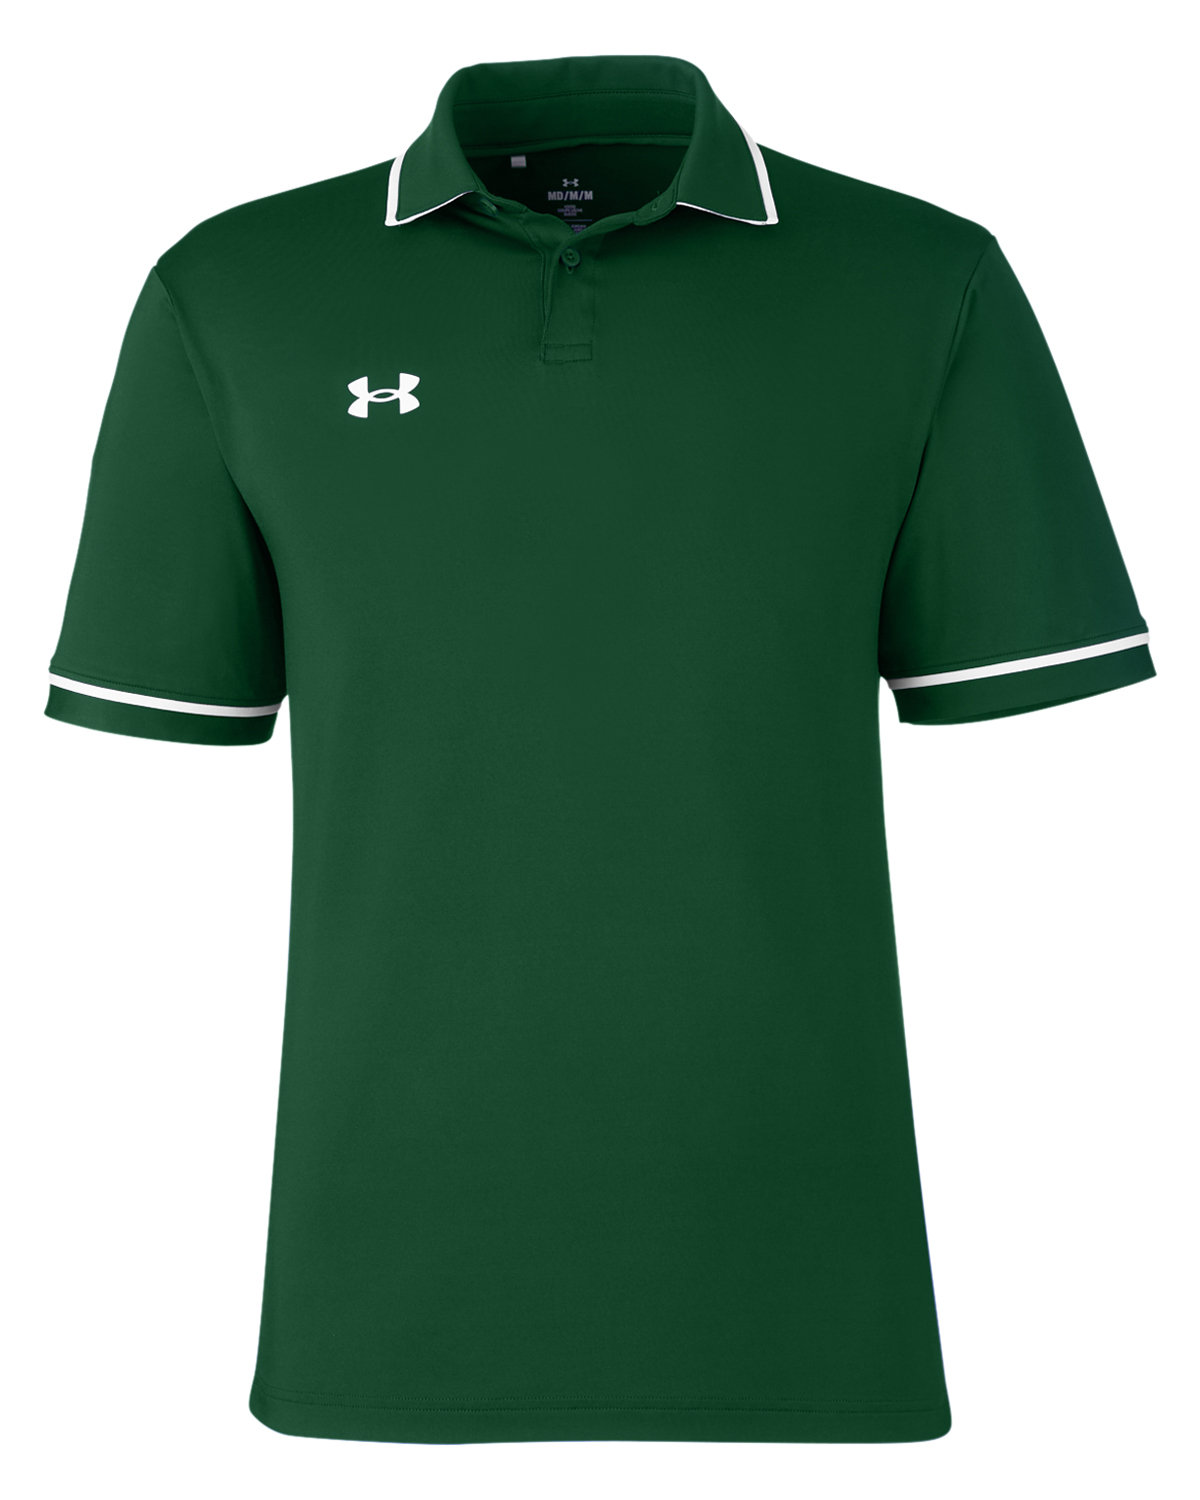 Under Armour Men's Tipped Teams Performance Polo | alphabroder